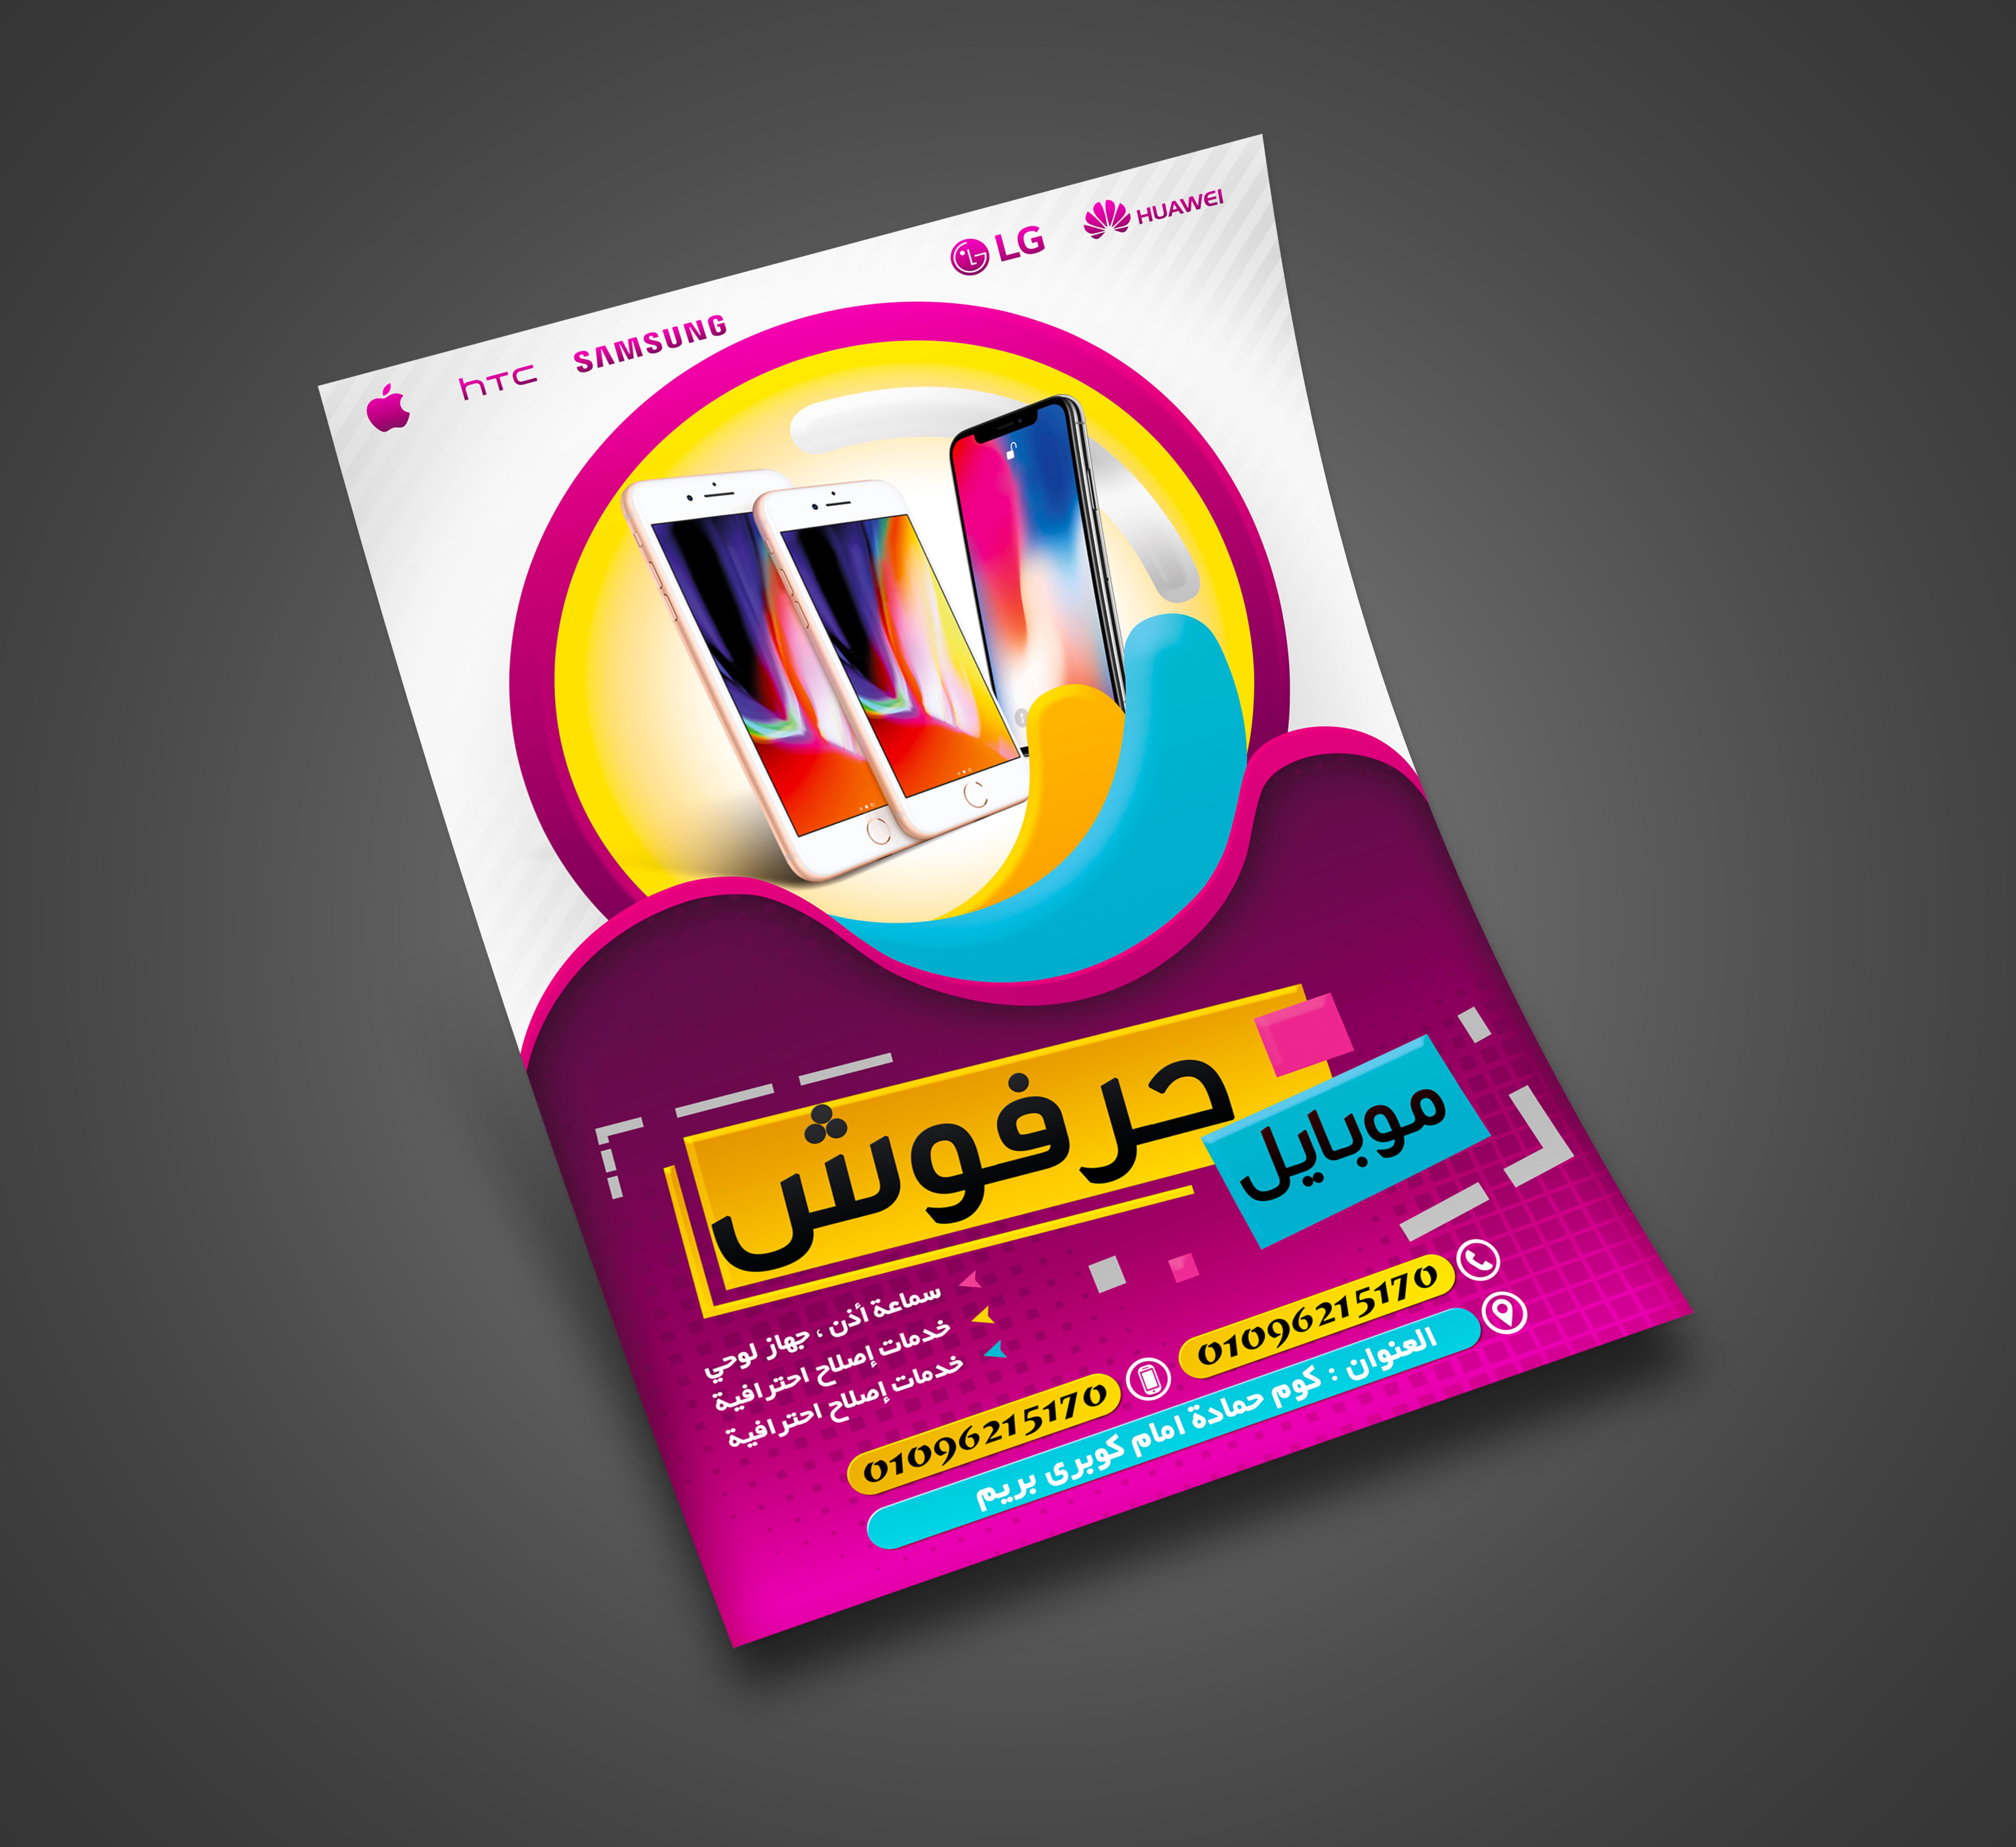 Mobile flyer design psd, call center and mobile accessories